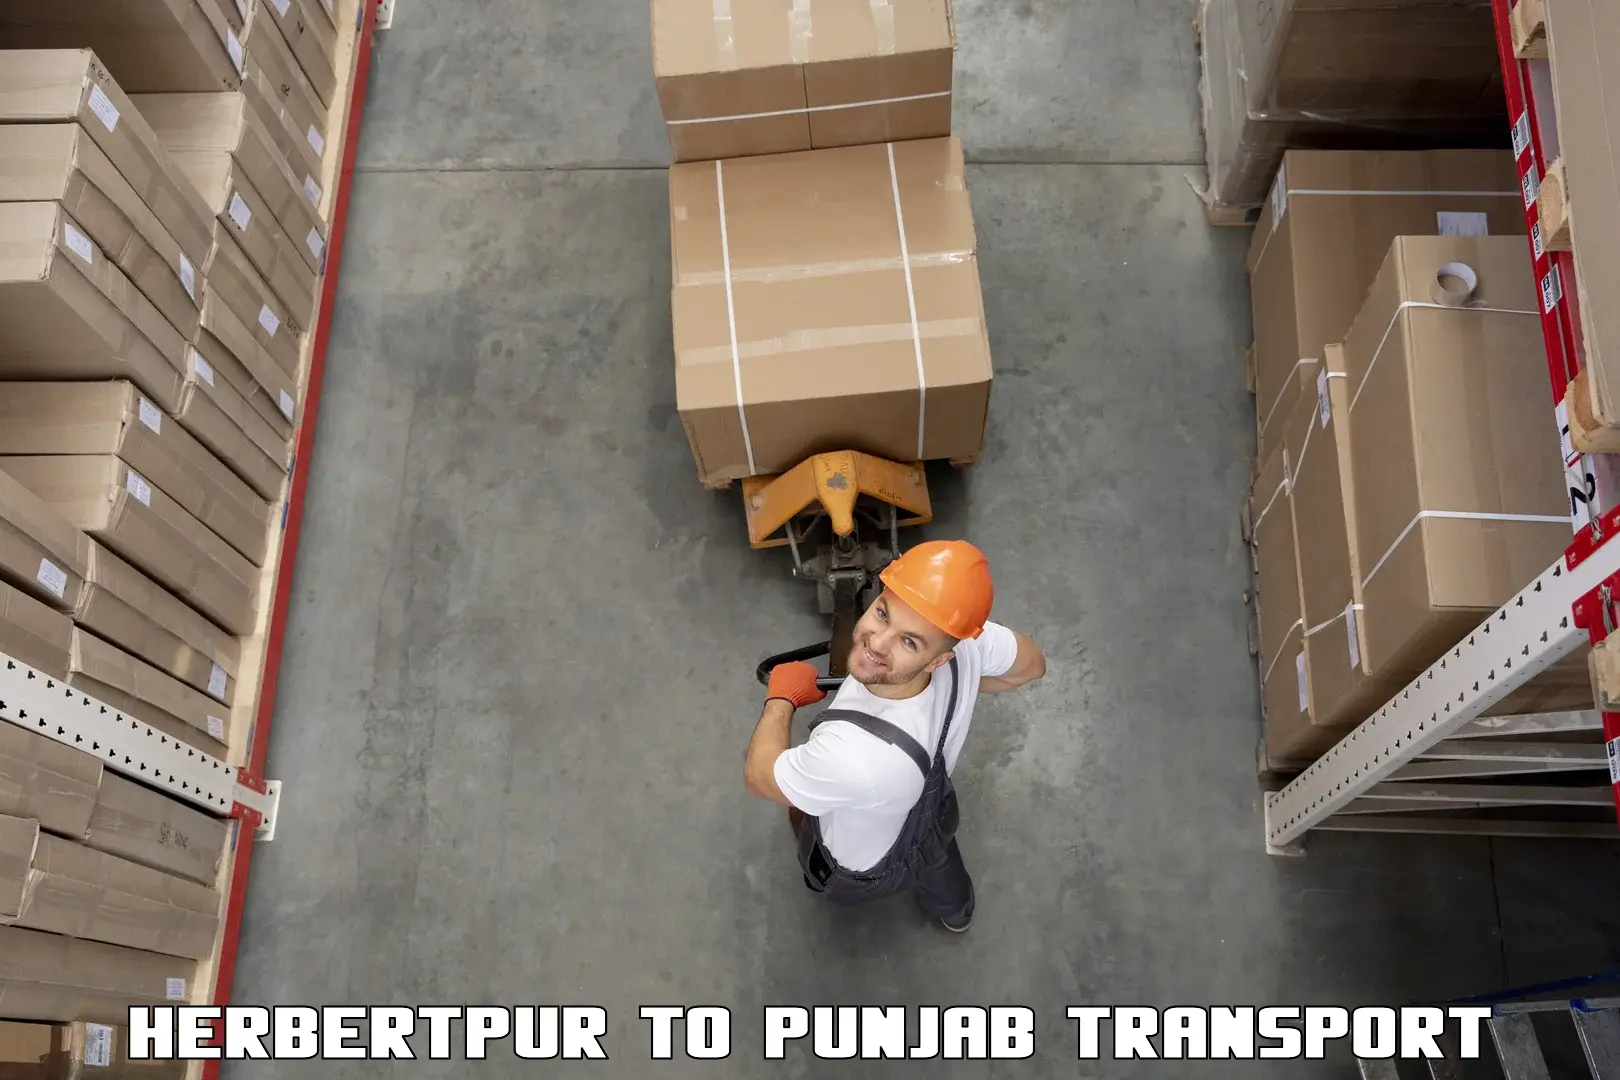 Transport bike from one state to another Herbertpur to Hoshiarpur